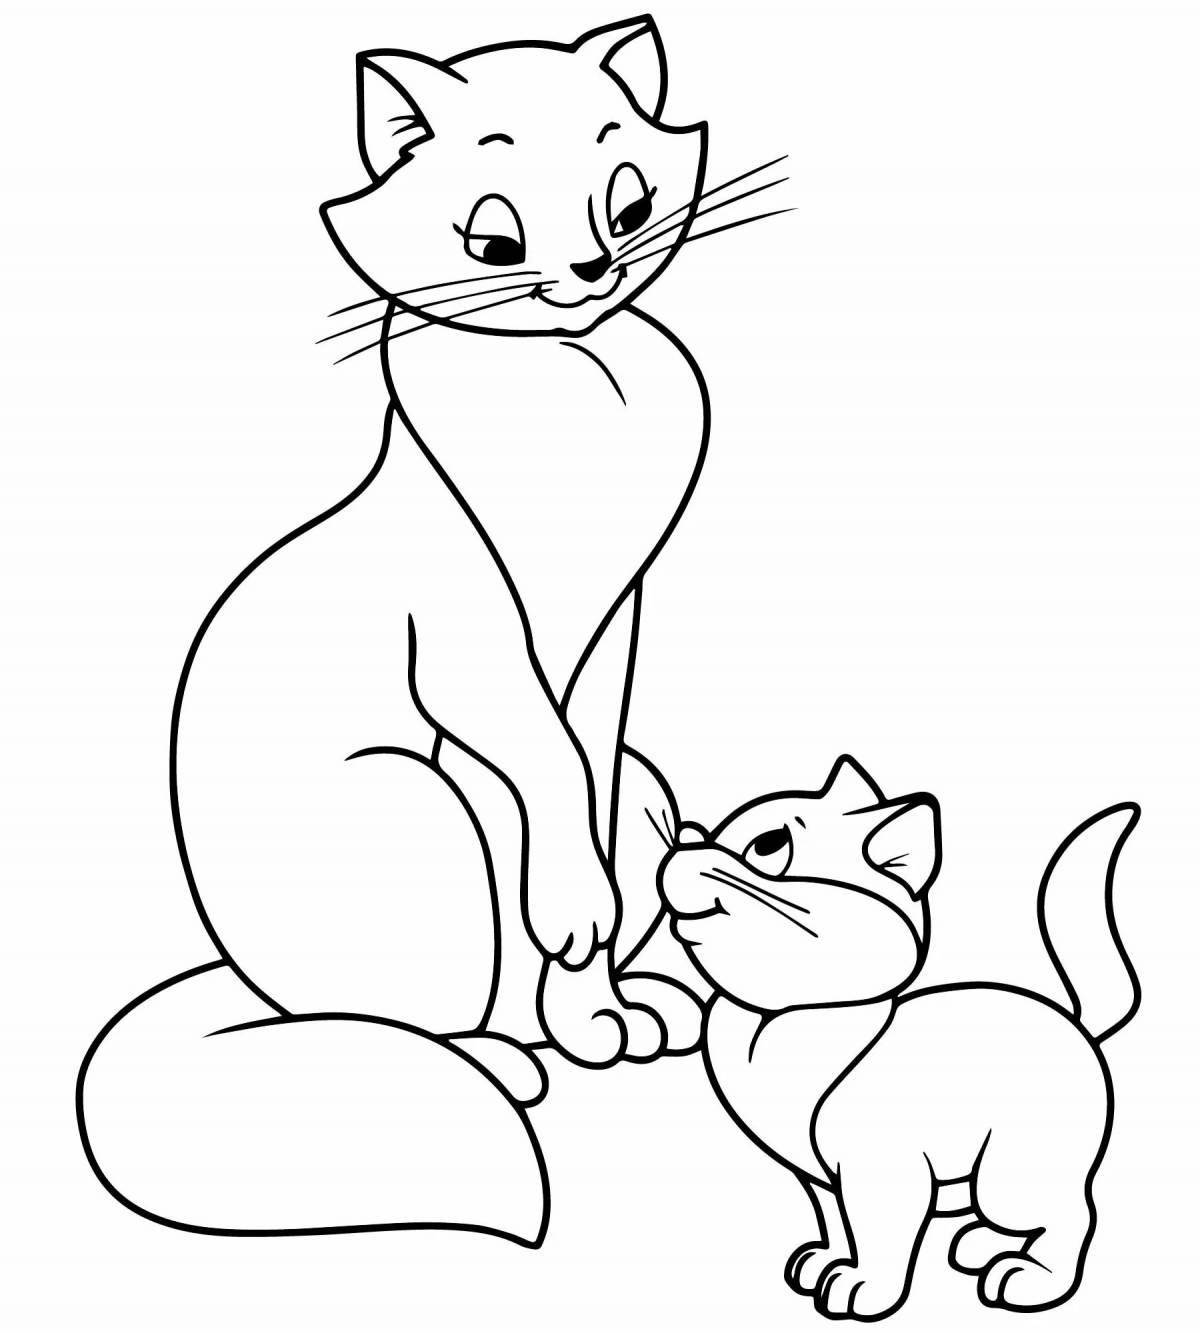 Naughty cat mom coloring page